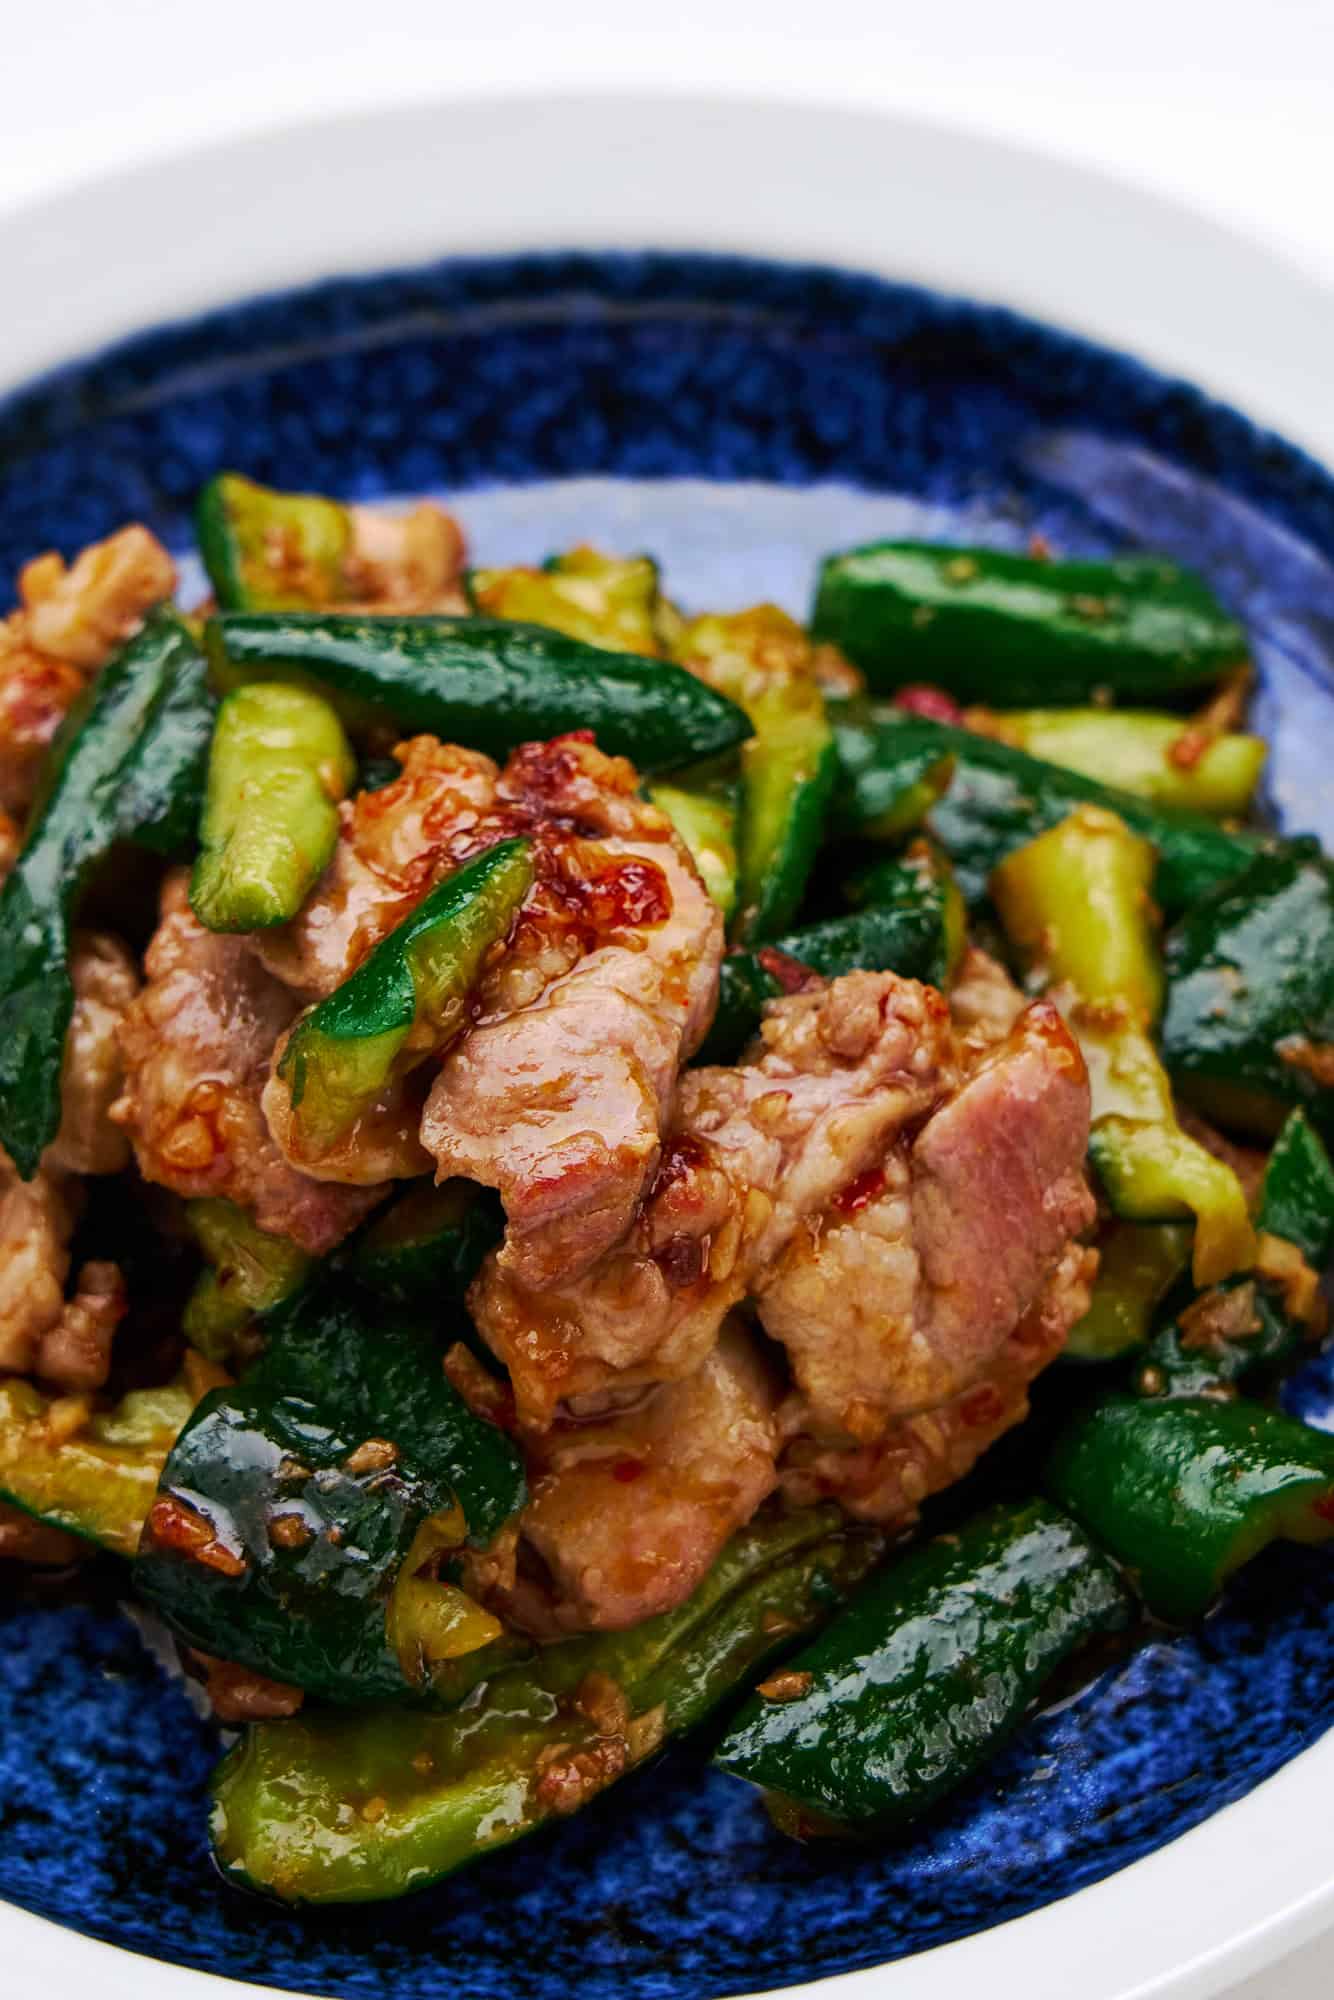 Smashed cucumbers stir-fried with cucumbers and spicy garlic chili paste.